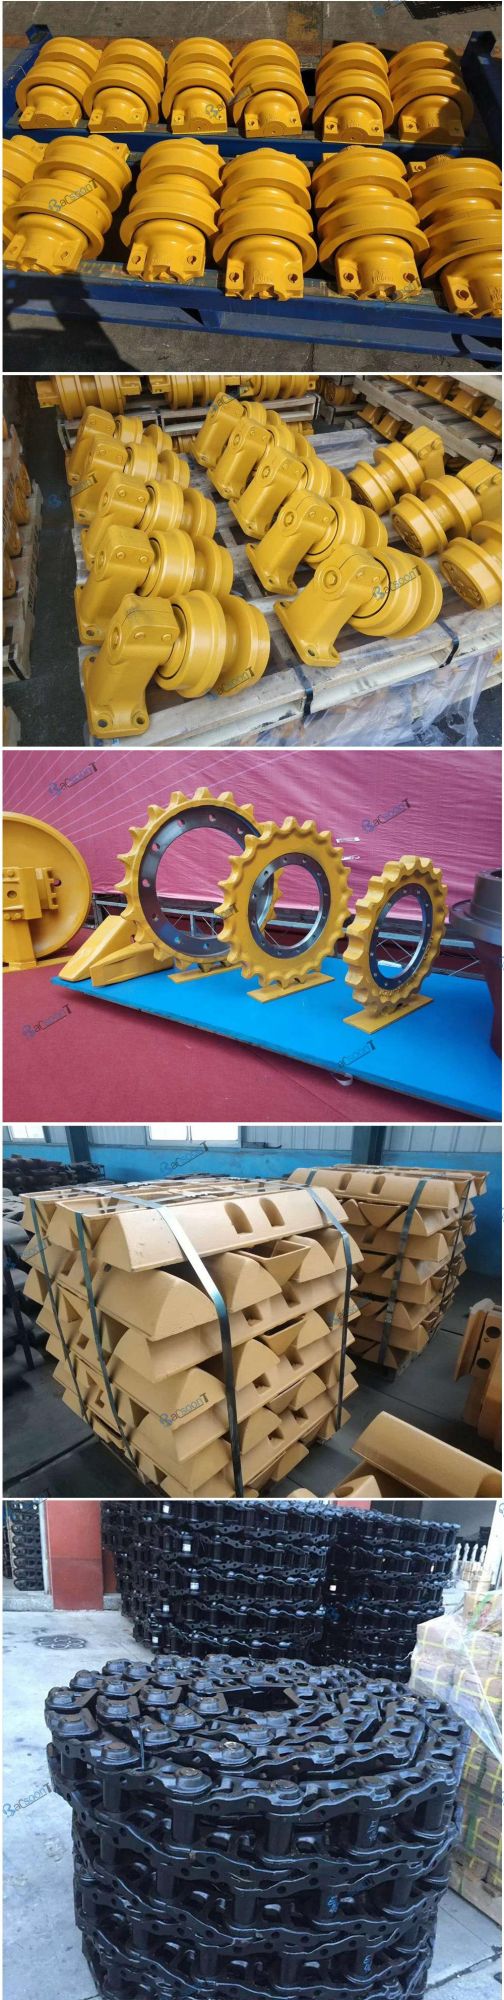 Steel Lower Roller/Roller Group for Engineering Machinery in China